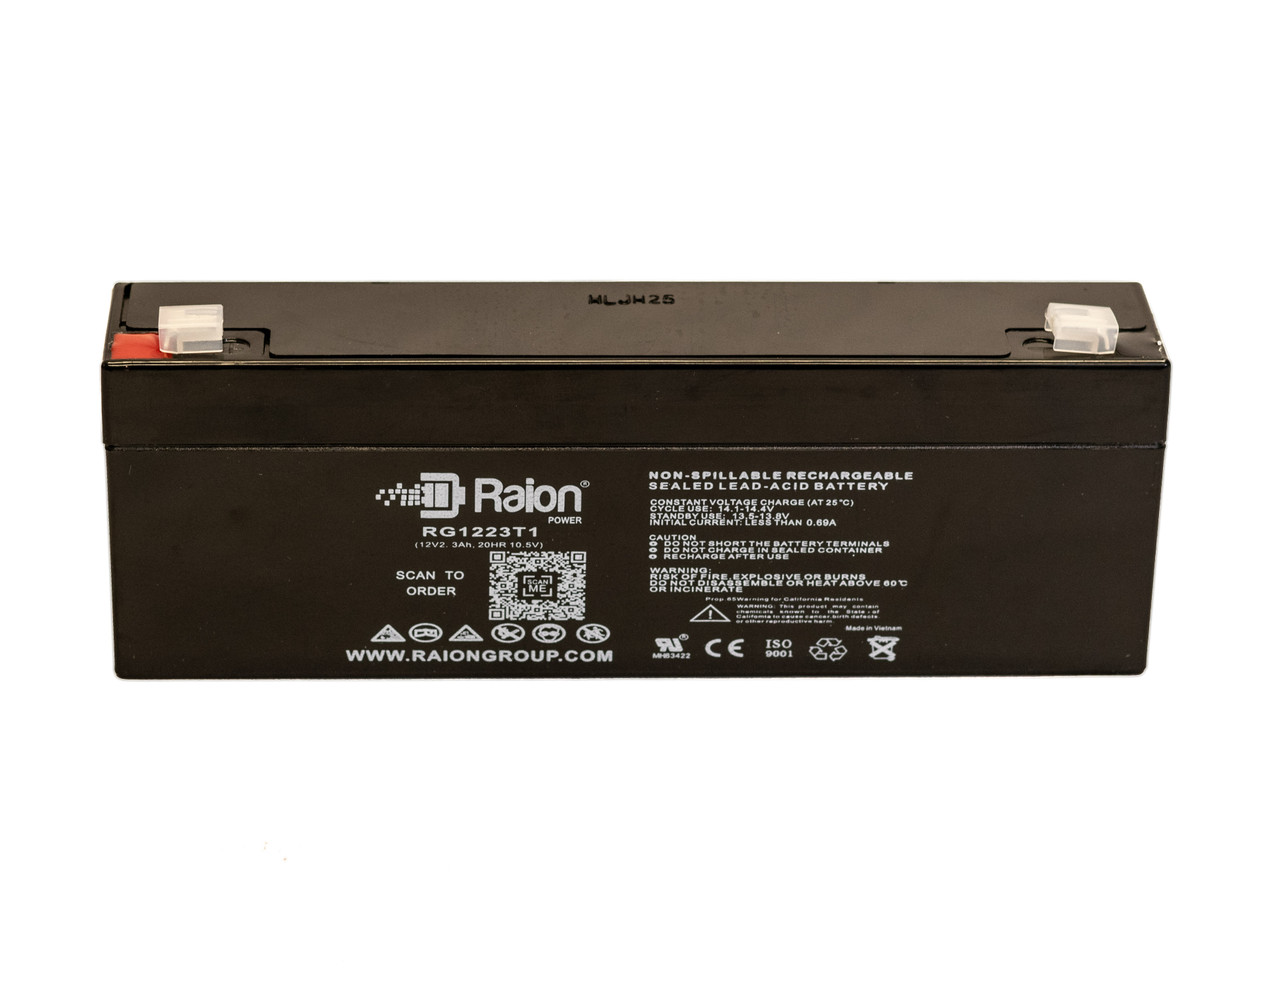 Raion Power 12V 2.3Ah SLA Battery With T1 Terminals For Criticare Systems 602 11